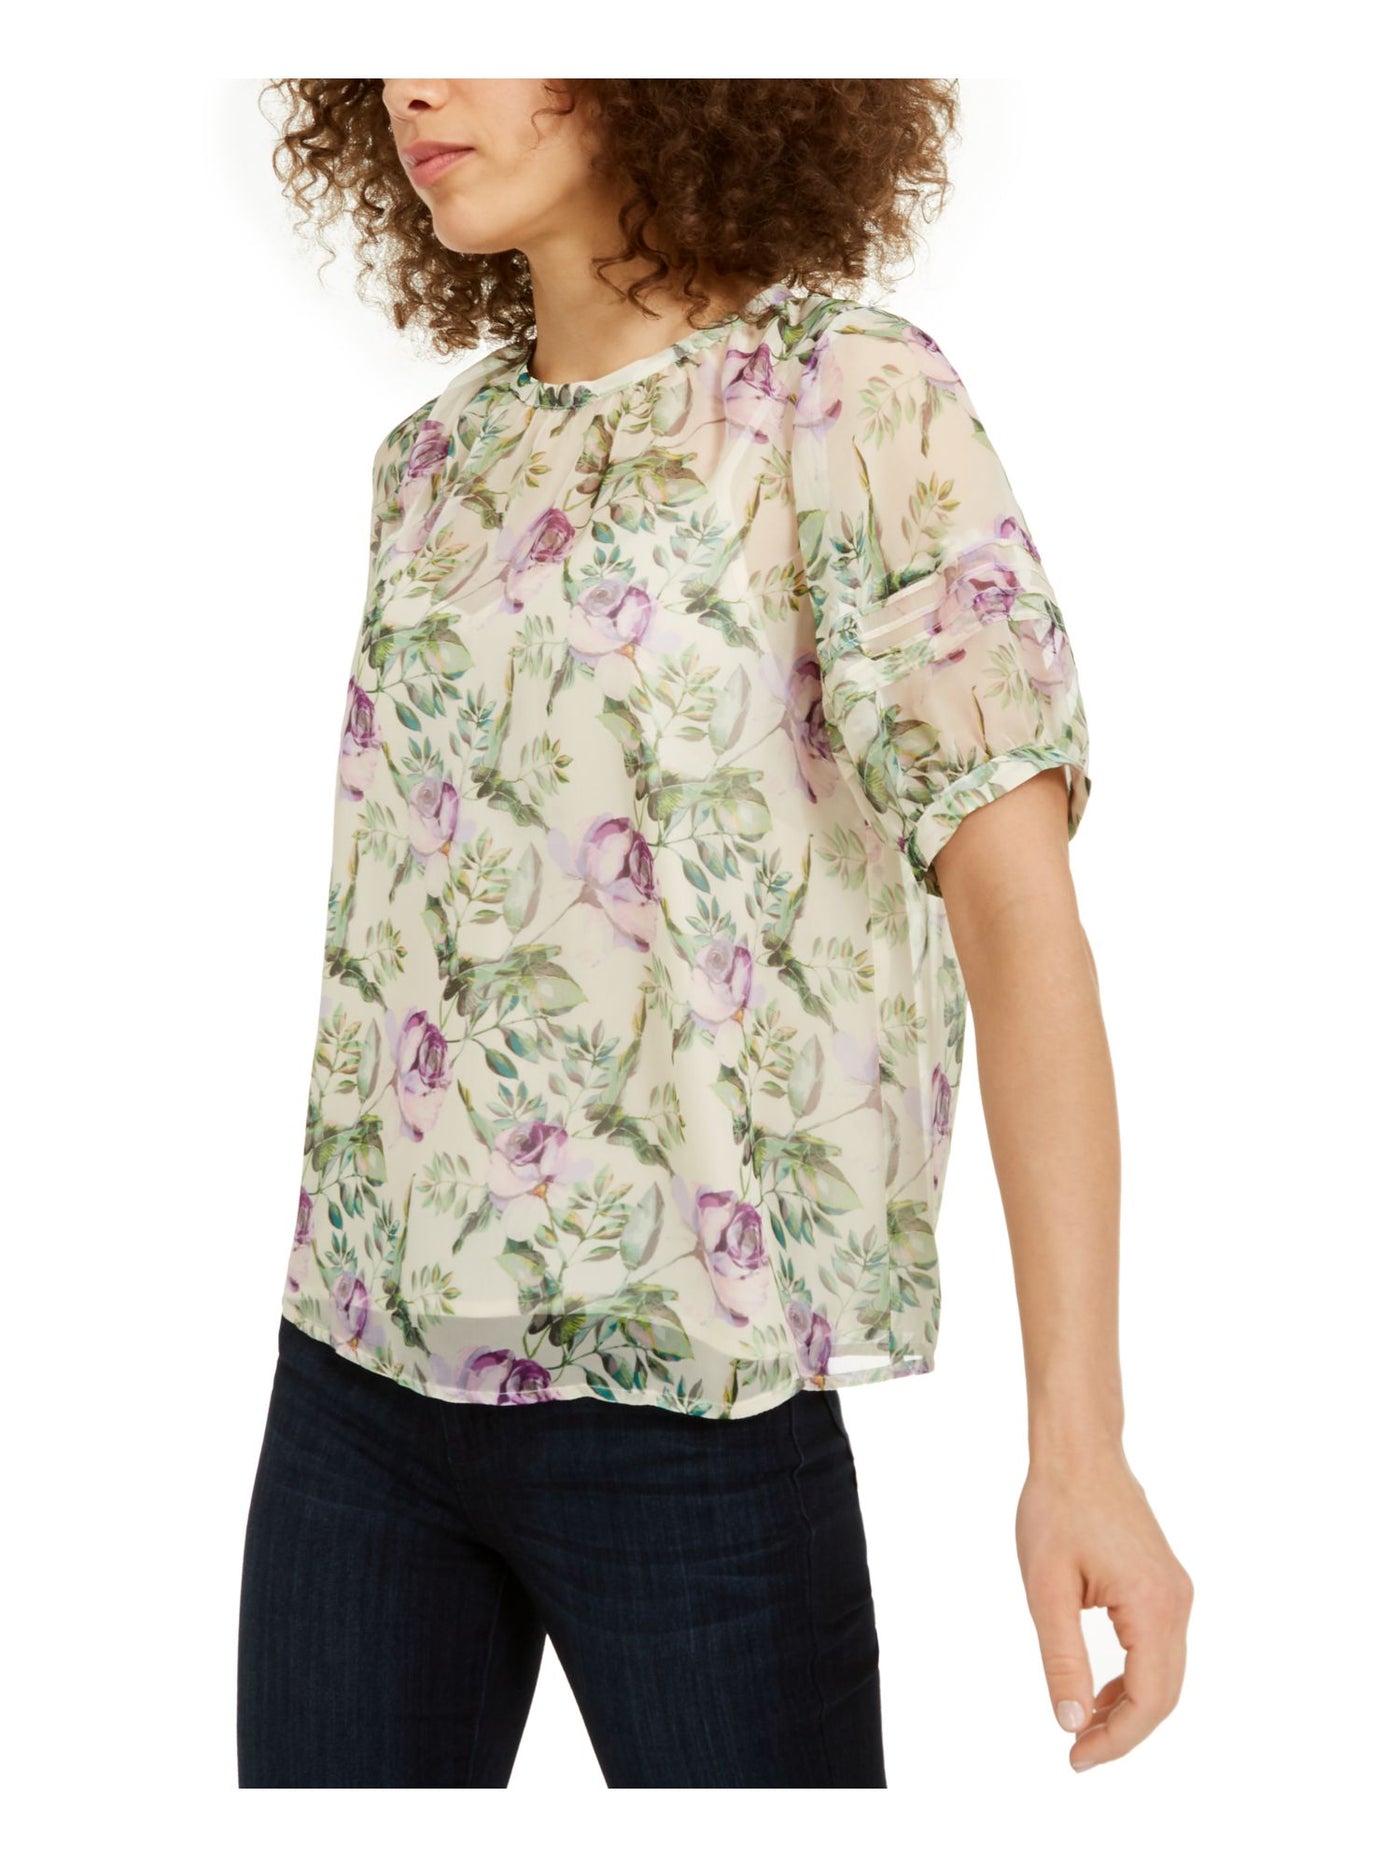 INC Womens Ivory Floral Short Sleeve Jewel Neck Top L